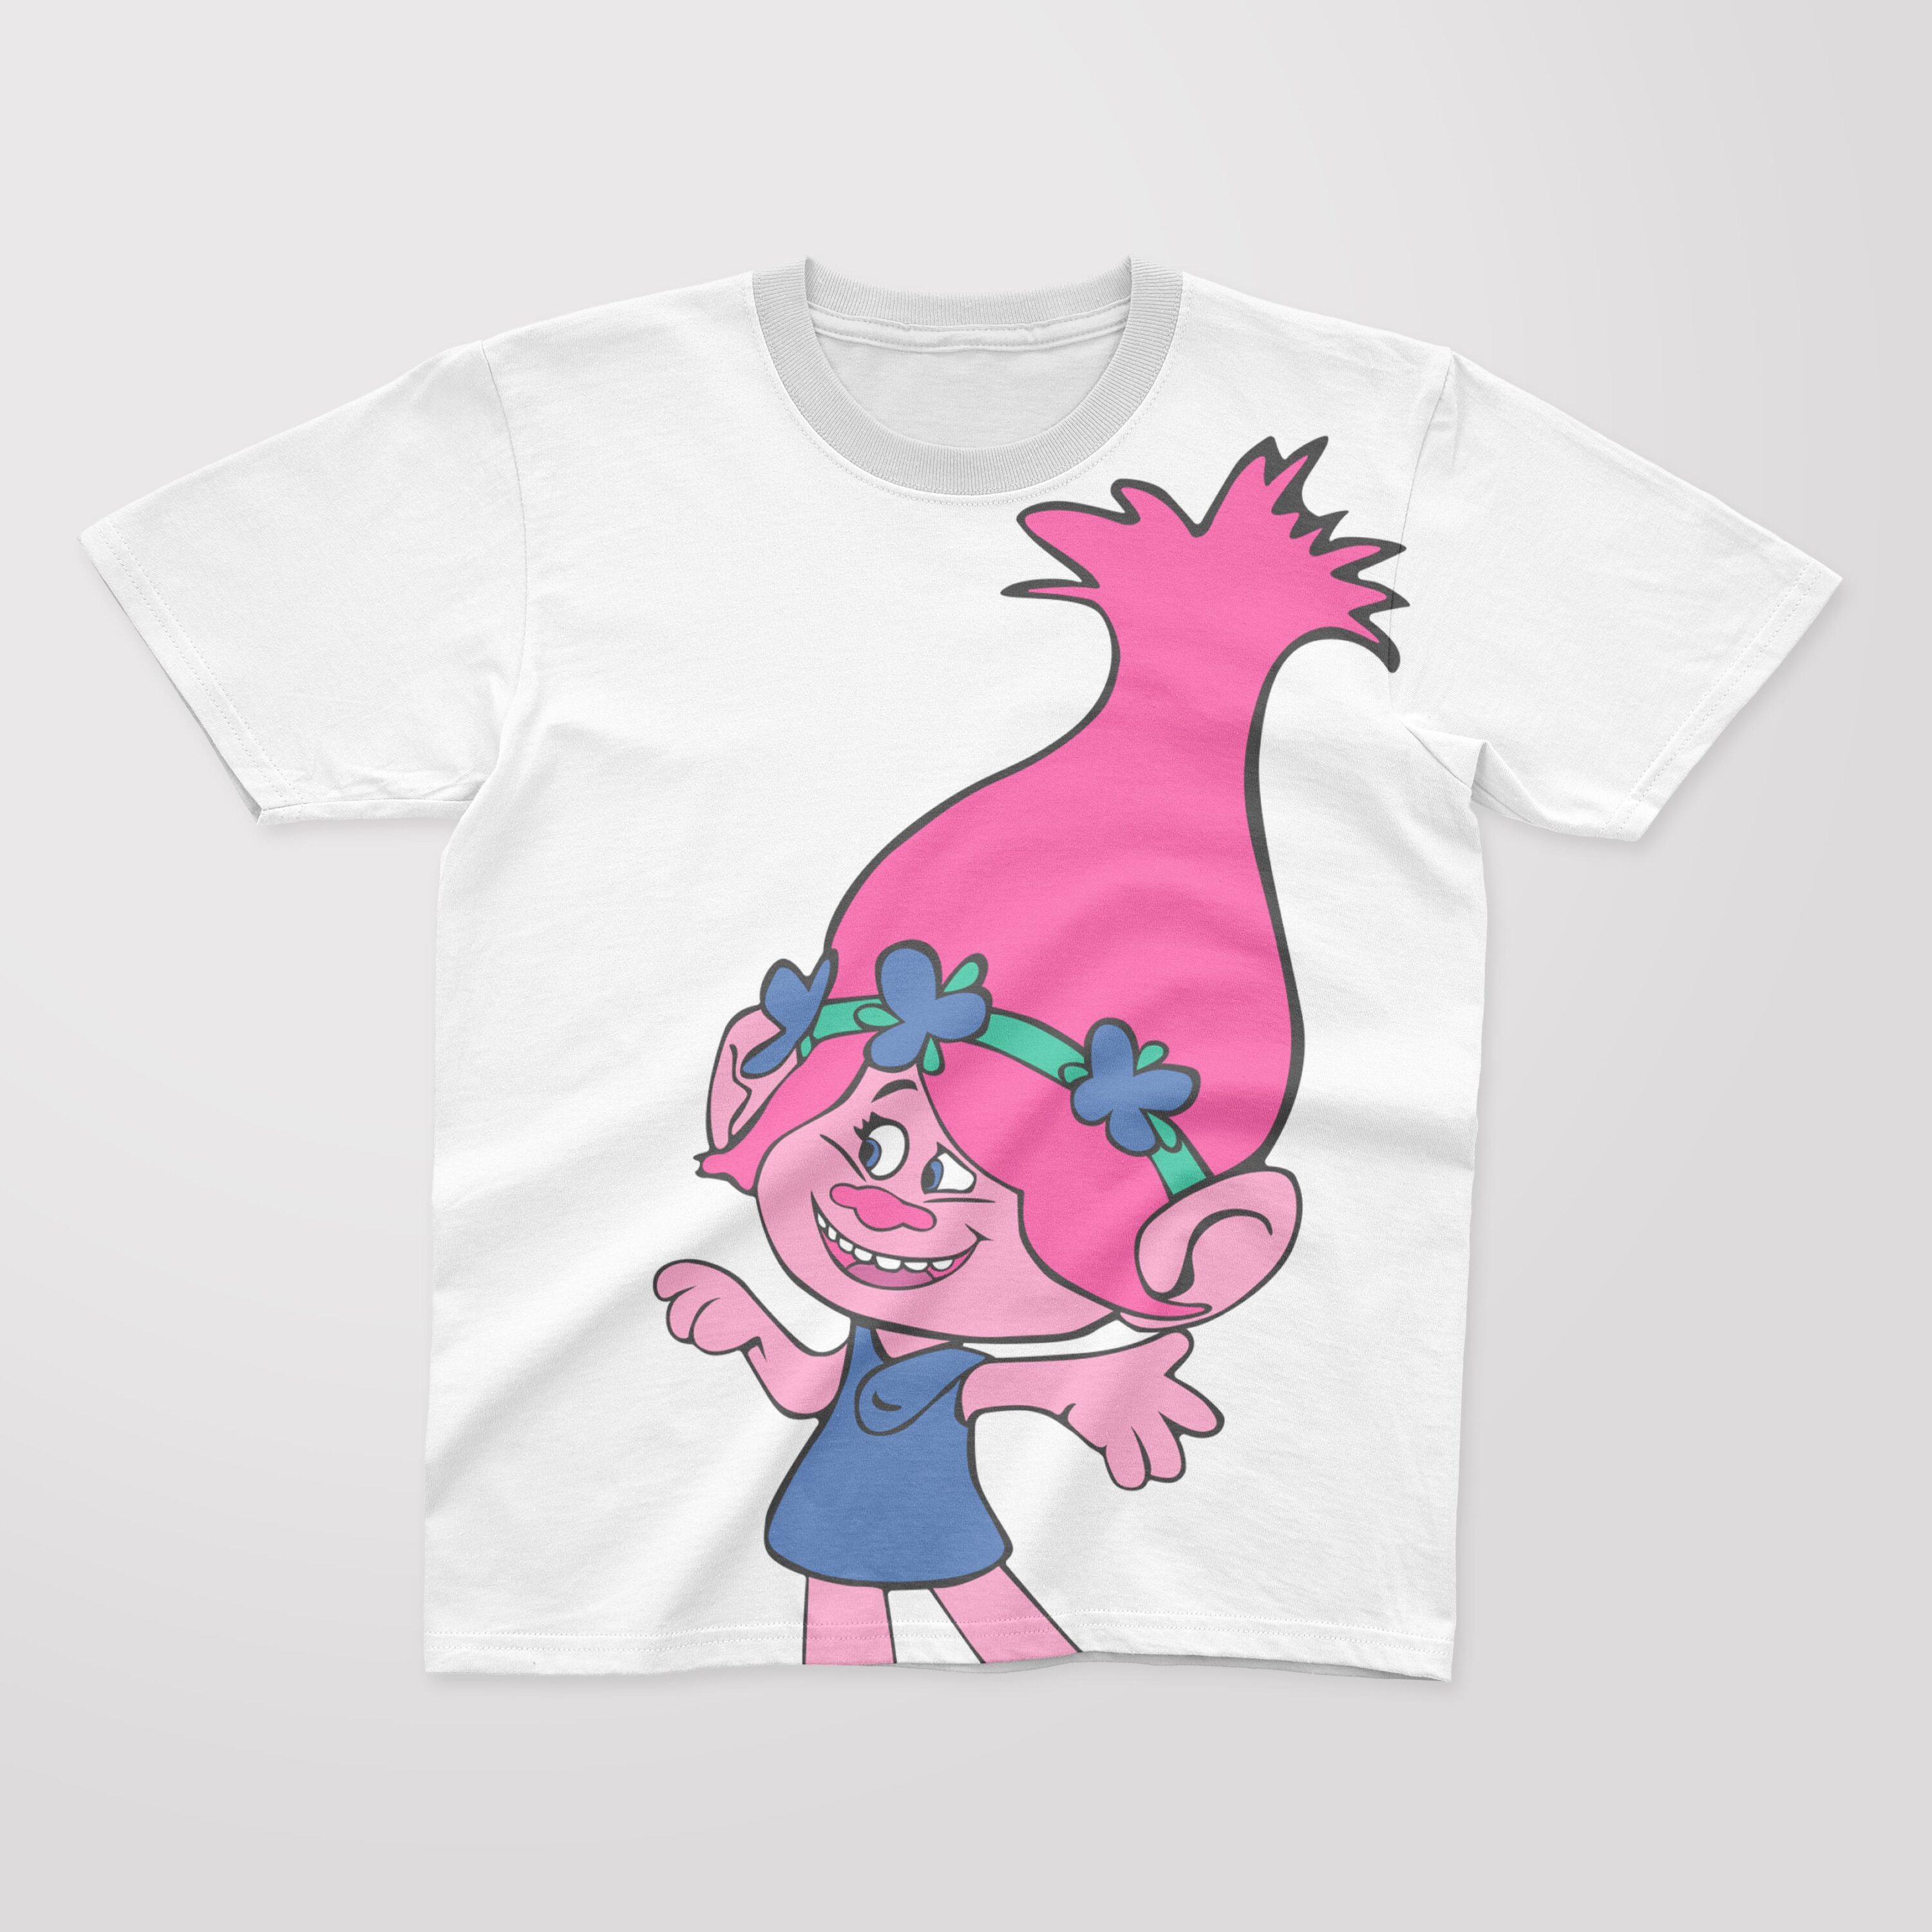 White T-shirt with image of cartoon character - Poppy.